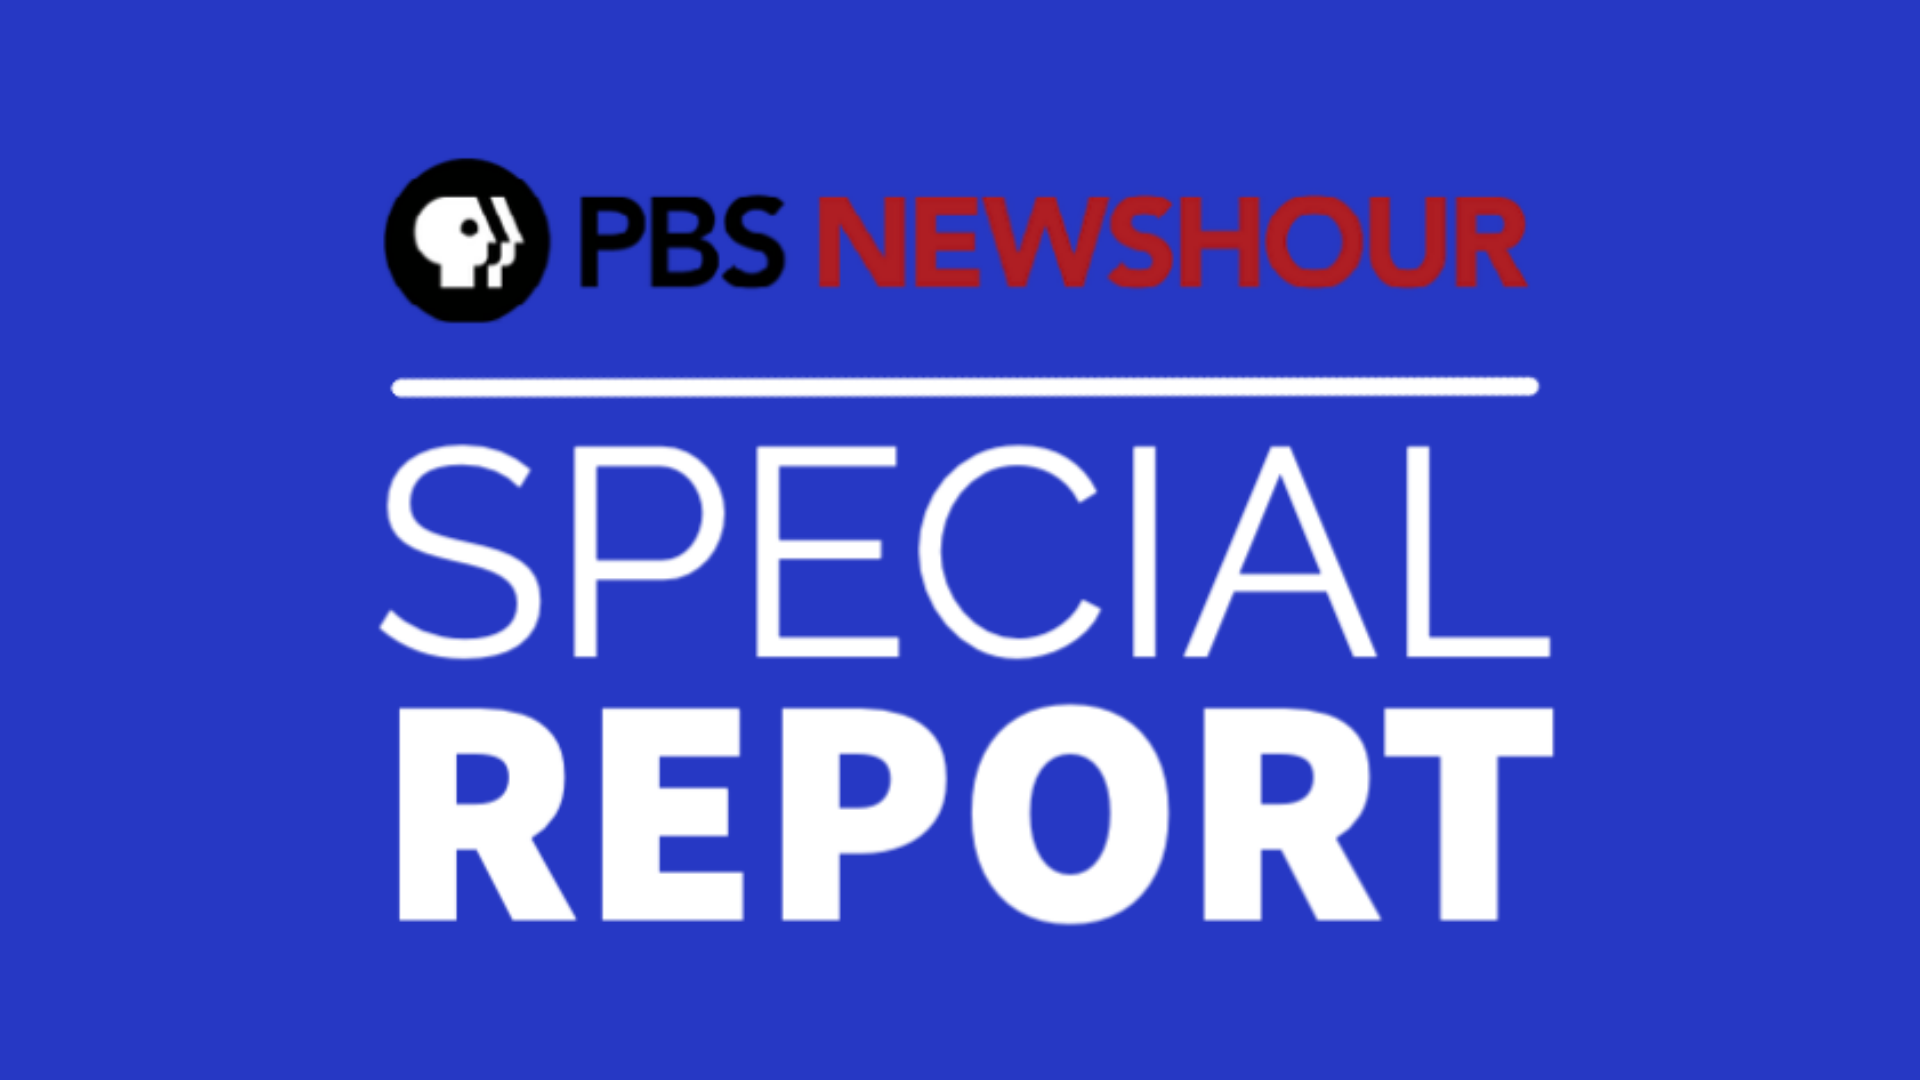 The End of Roe: PBS NewsHour Special Report